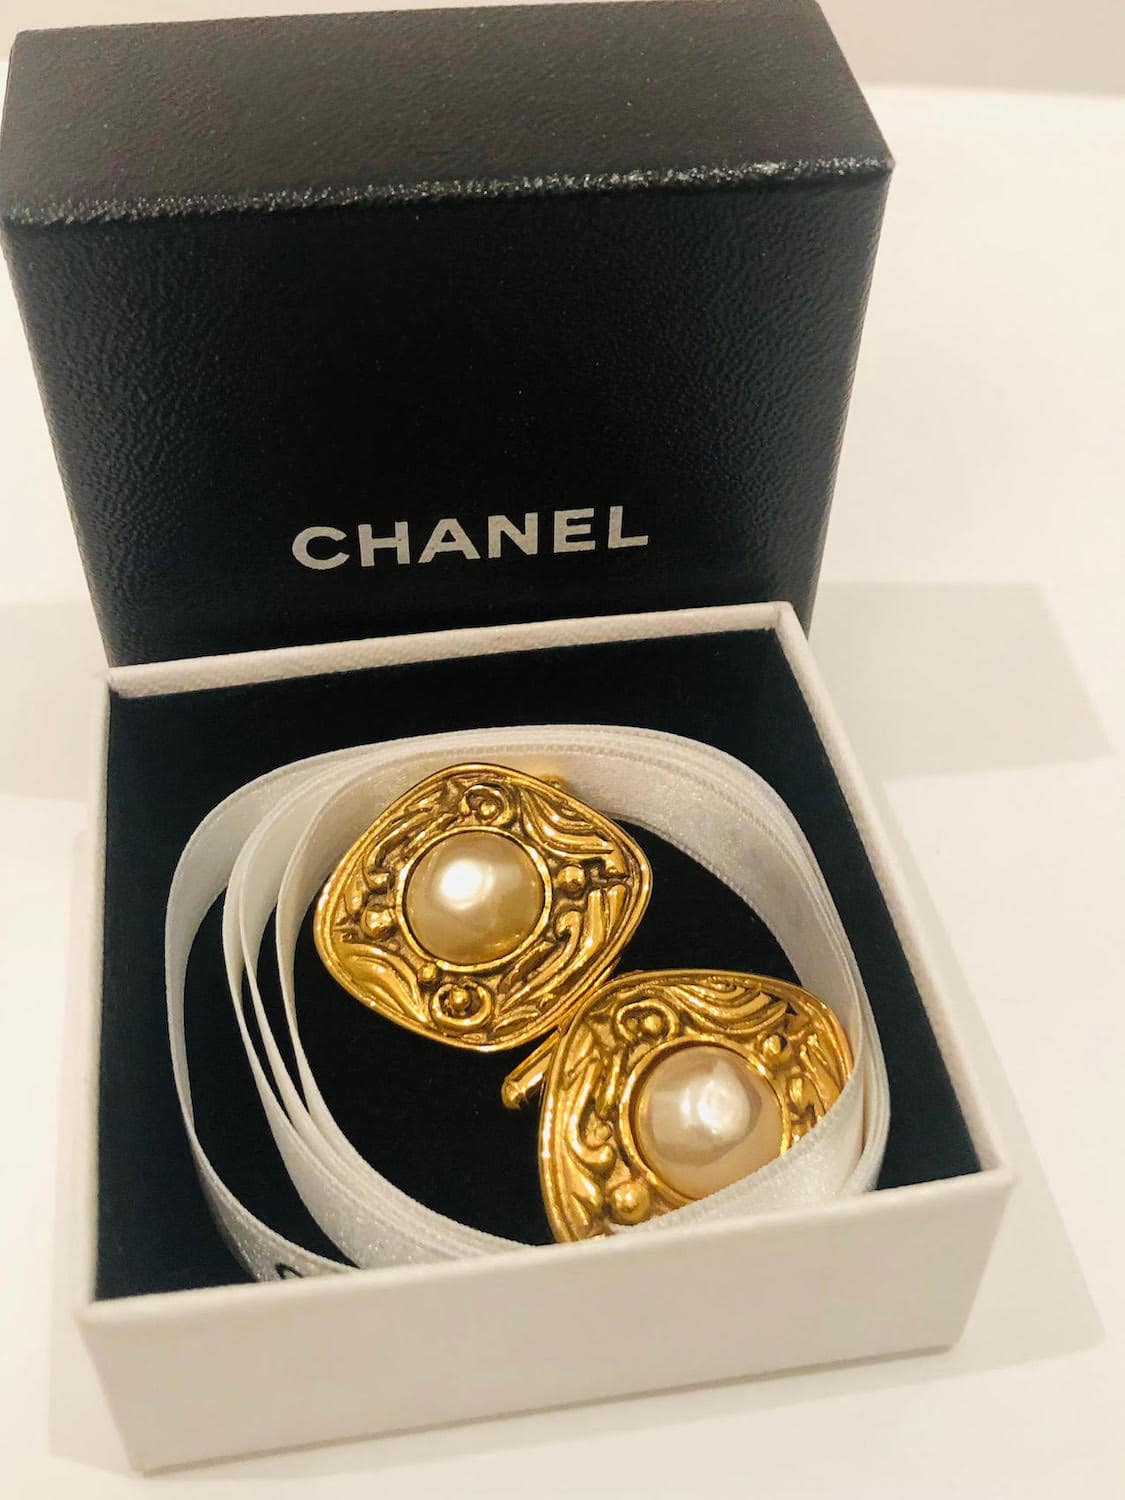 CHANEL 1980s Cufflinks Pearl & Gold Baroque Arabesque W/Box - Chelsea  Vintage Couture